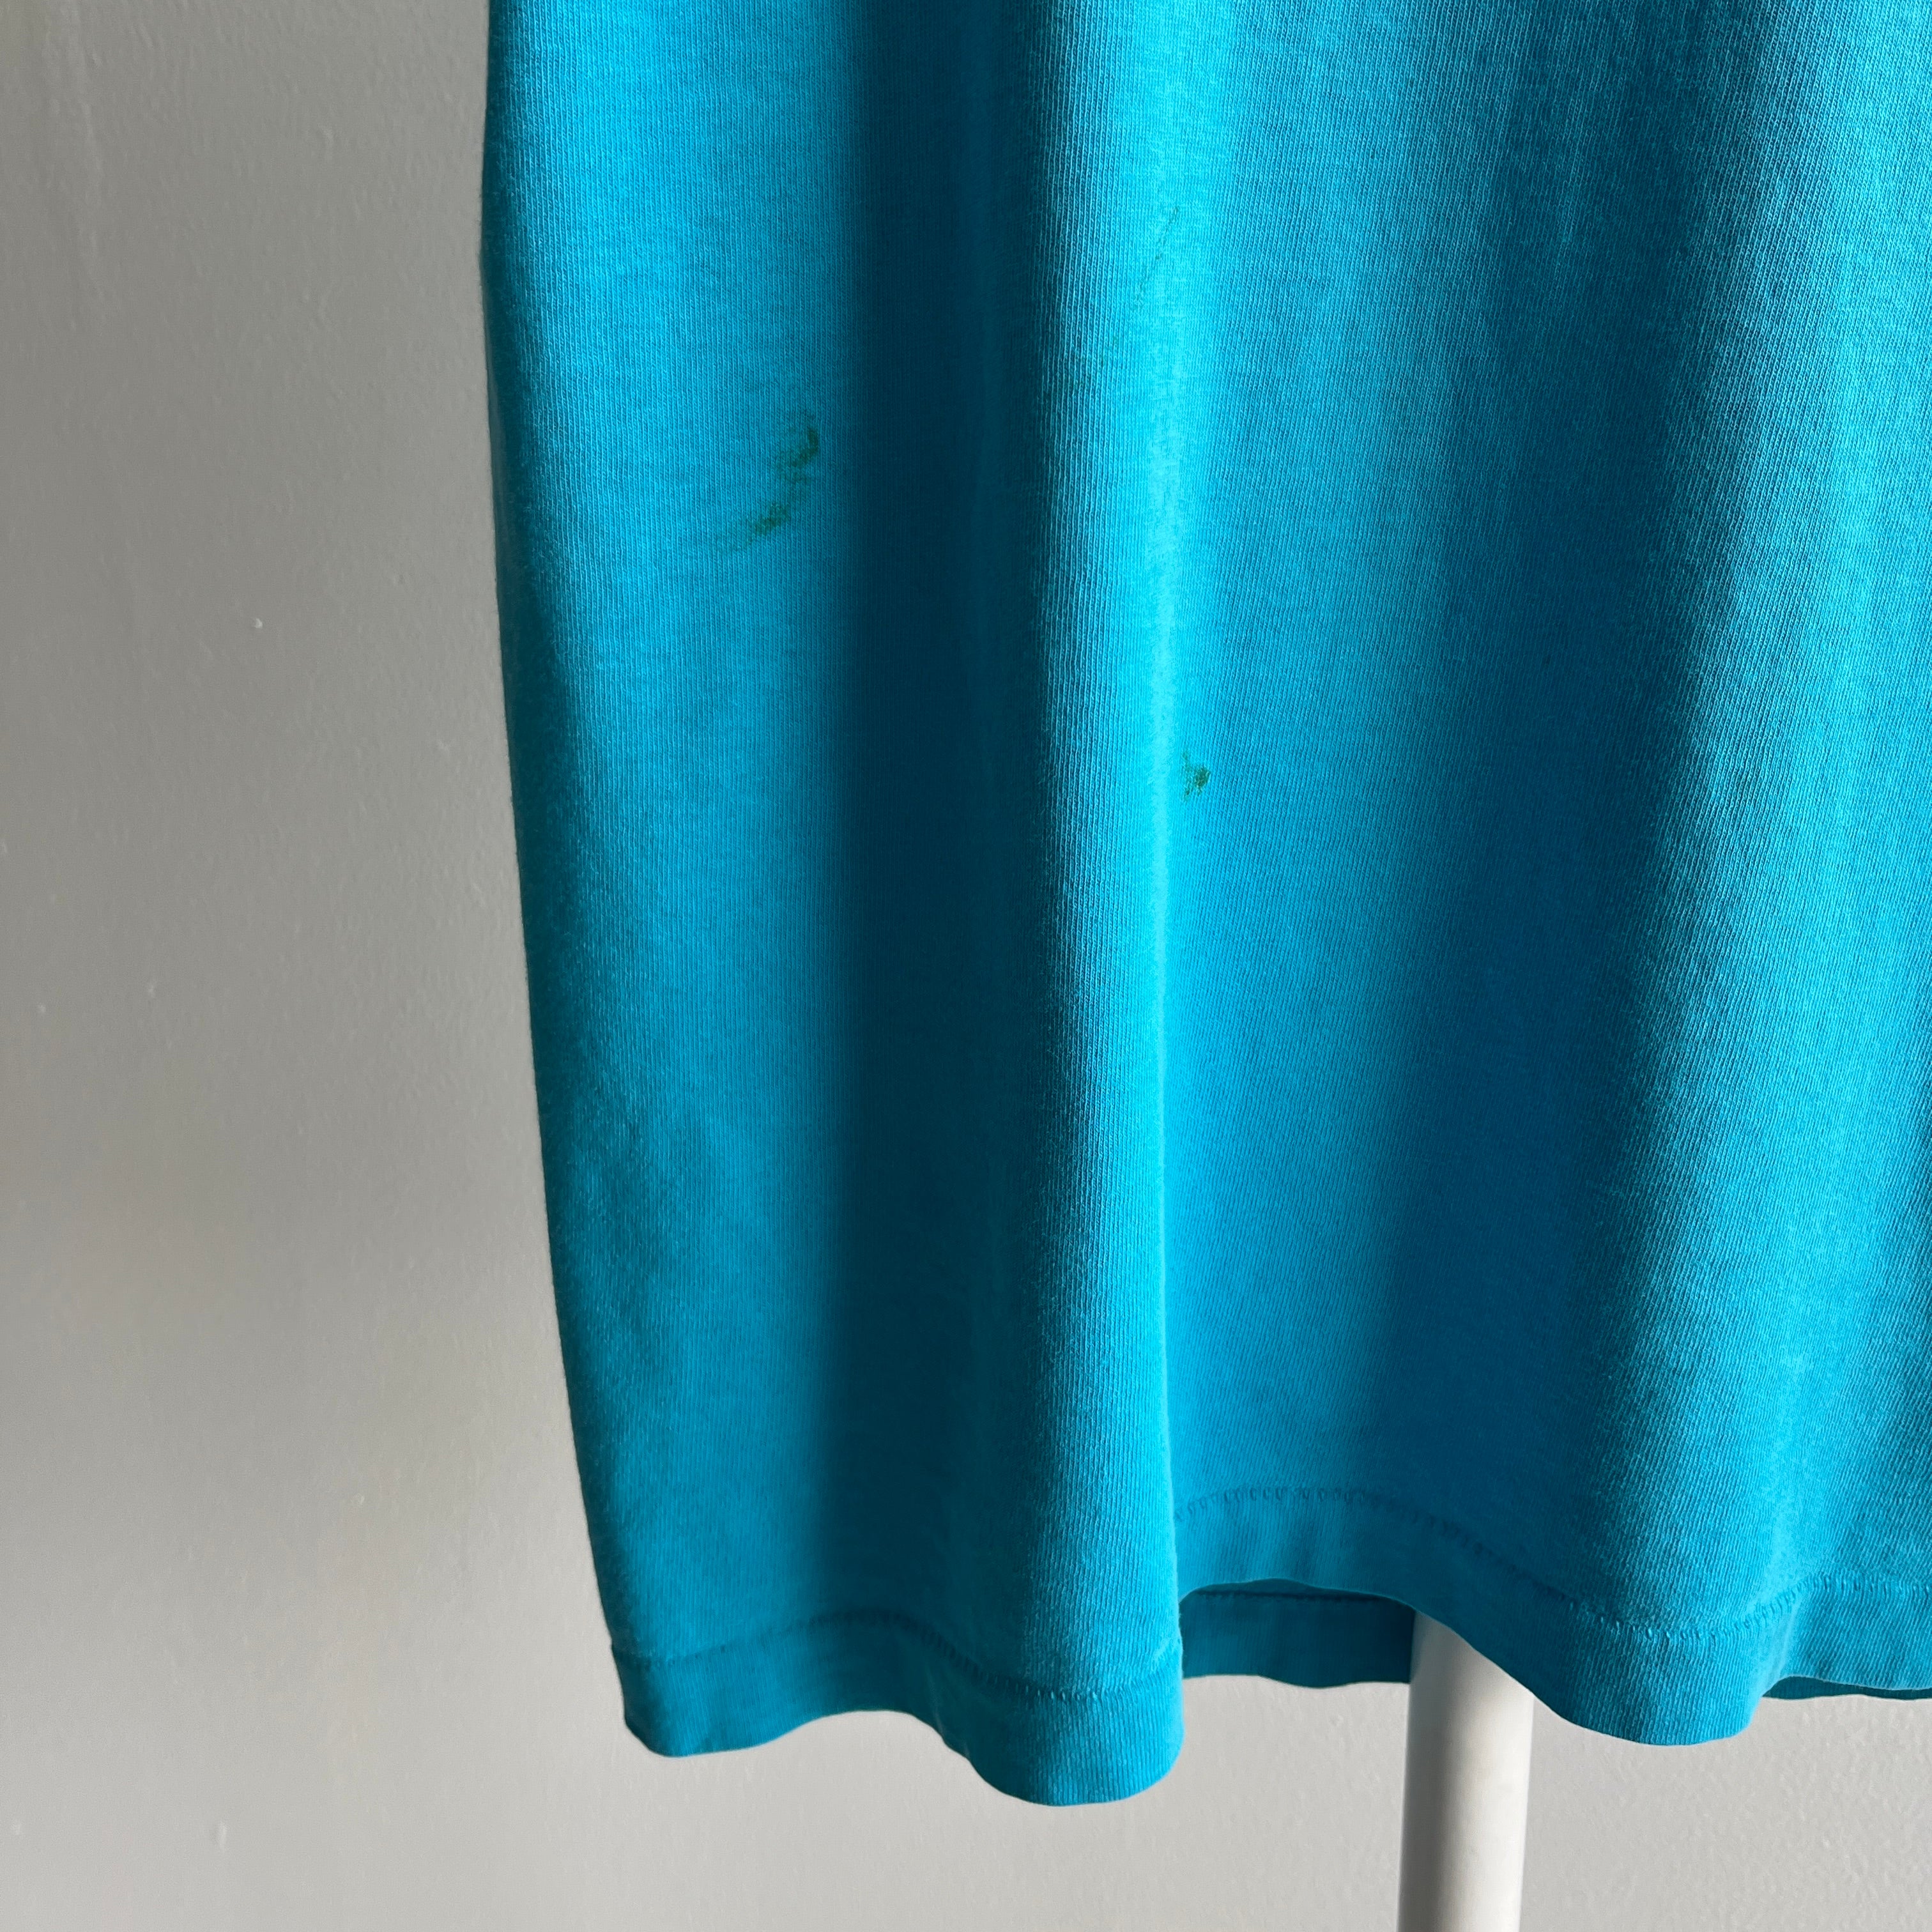 1980s Perfectly Tattered, Torn, Stained and Worn Turquoise FOTL T-Shirt